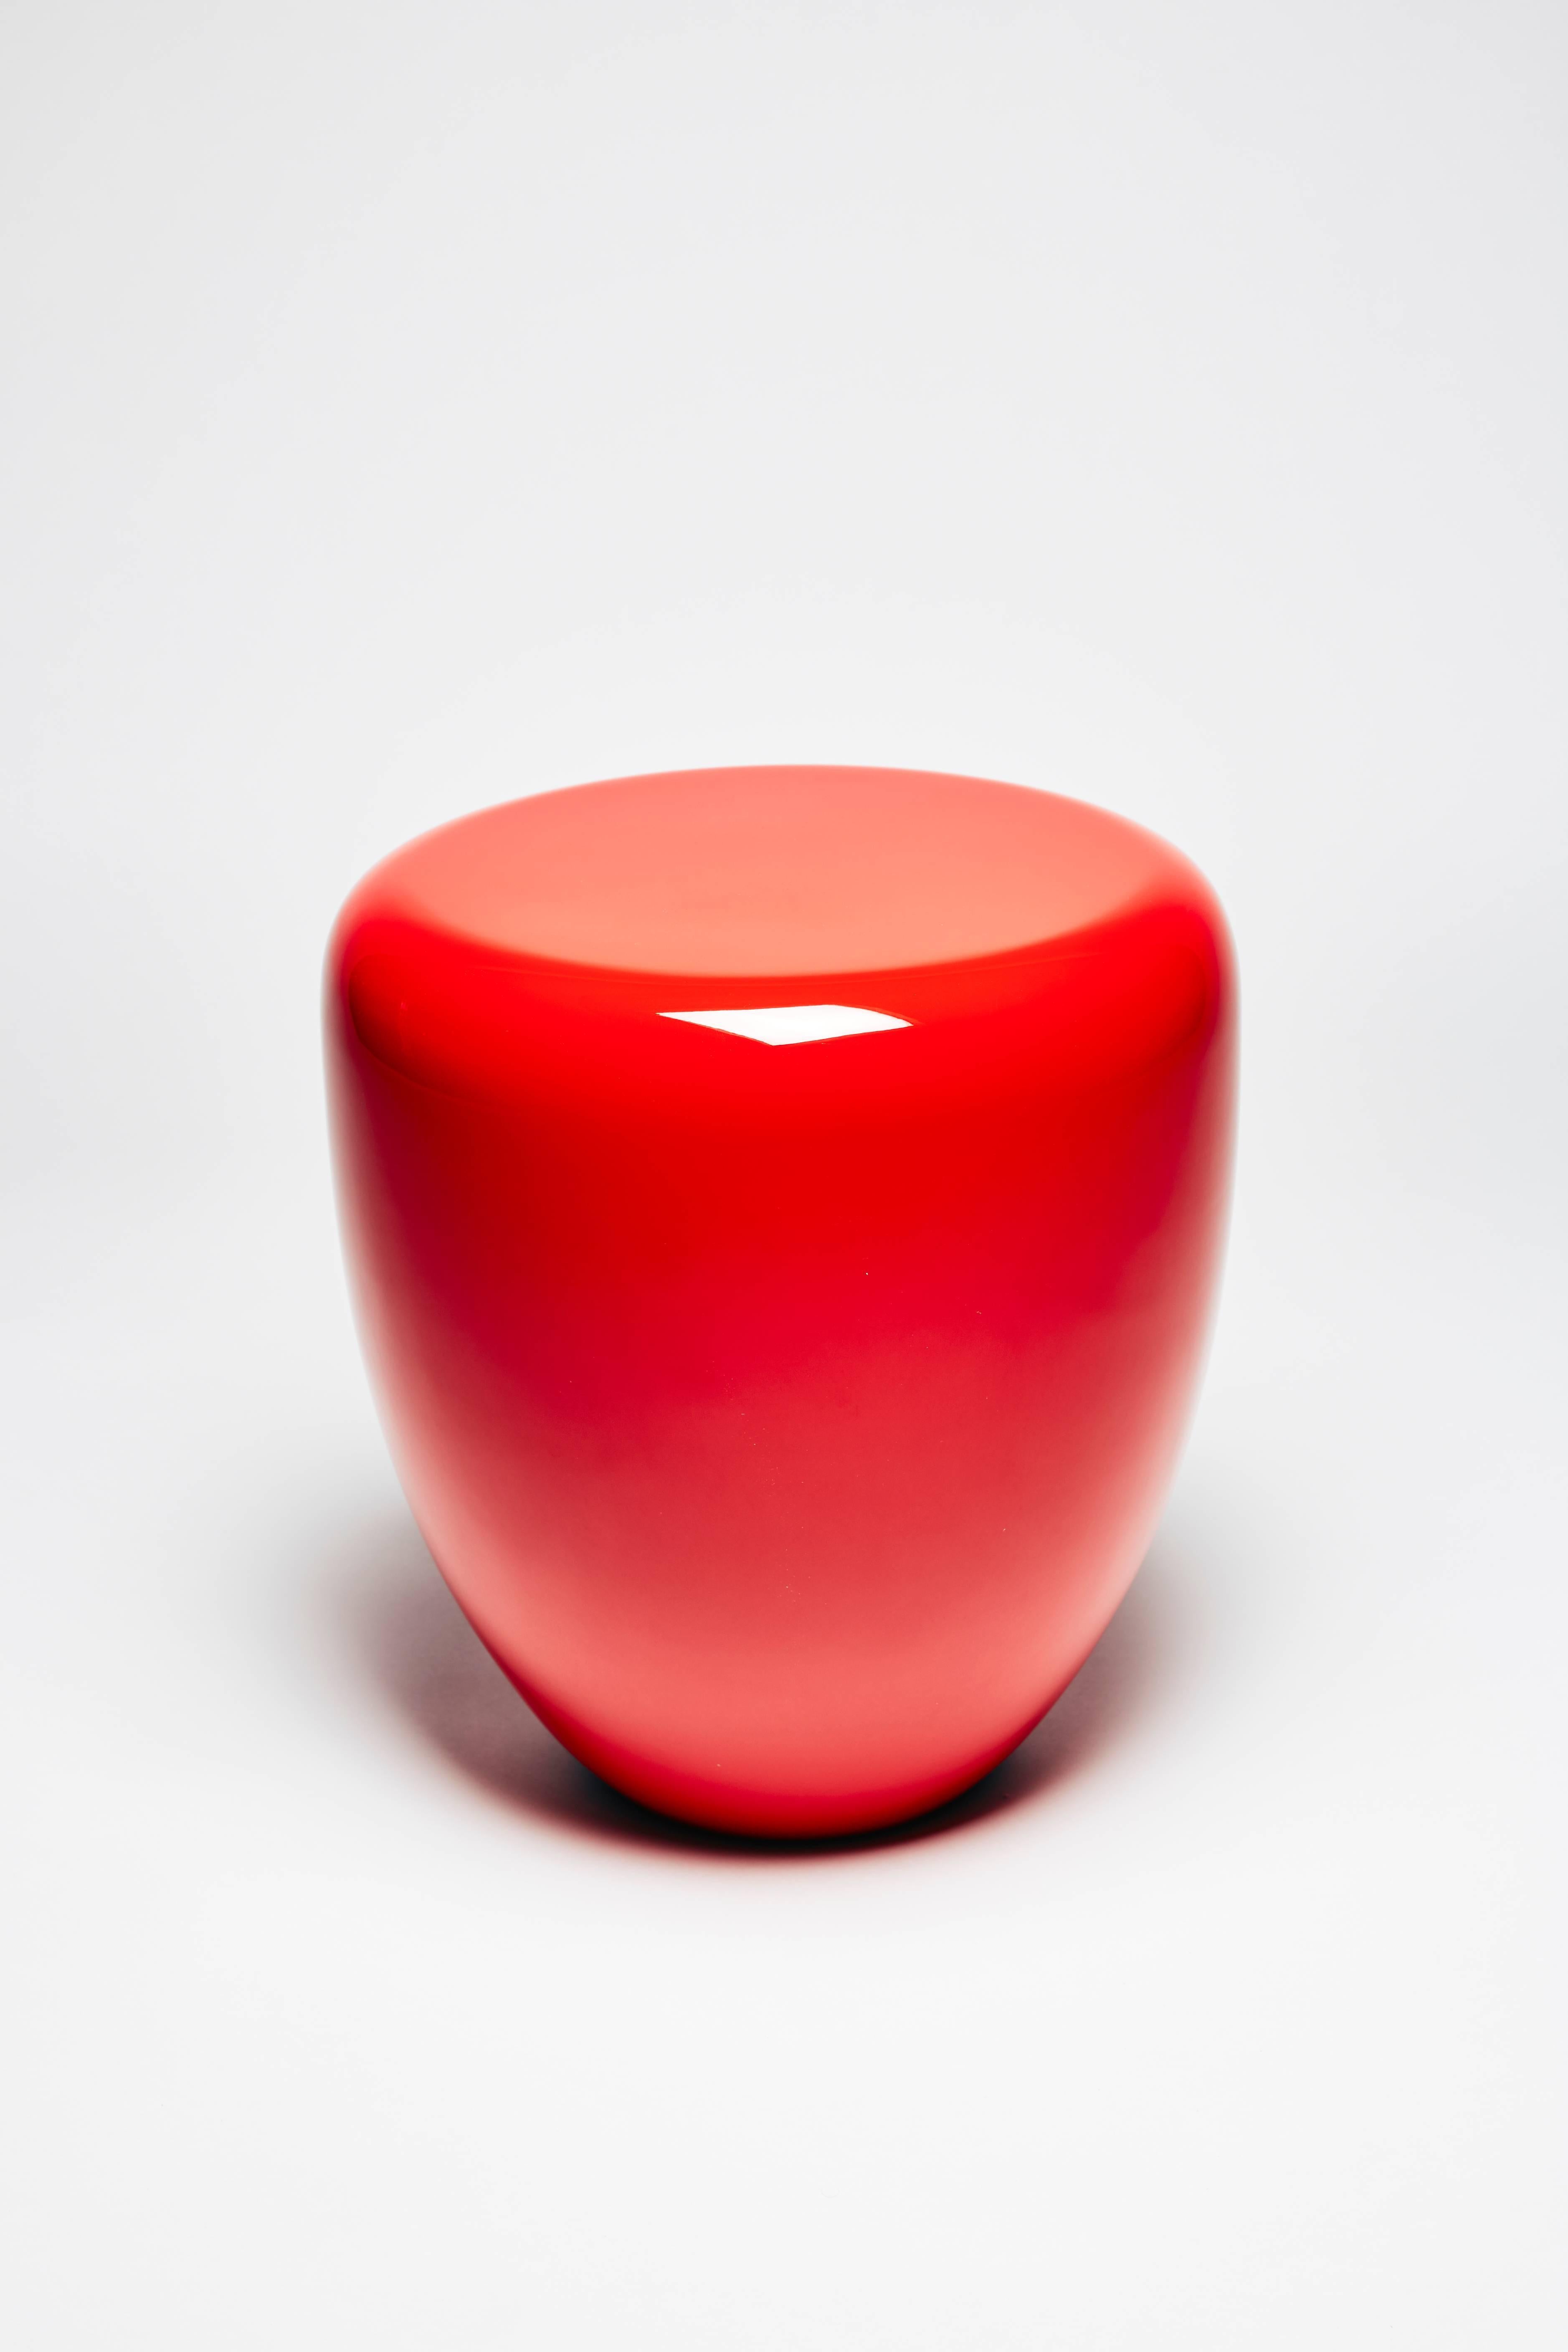 Minimalist Side Table, Iconic Red DOT by Reda Amalou Design, 2017 - Glossy or mate lacquer  For Sale